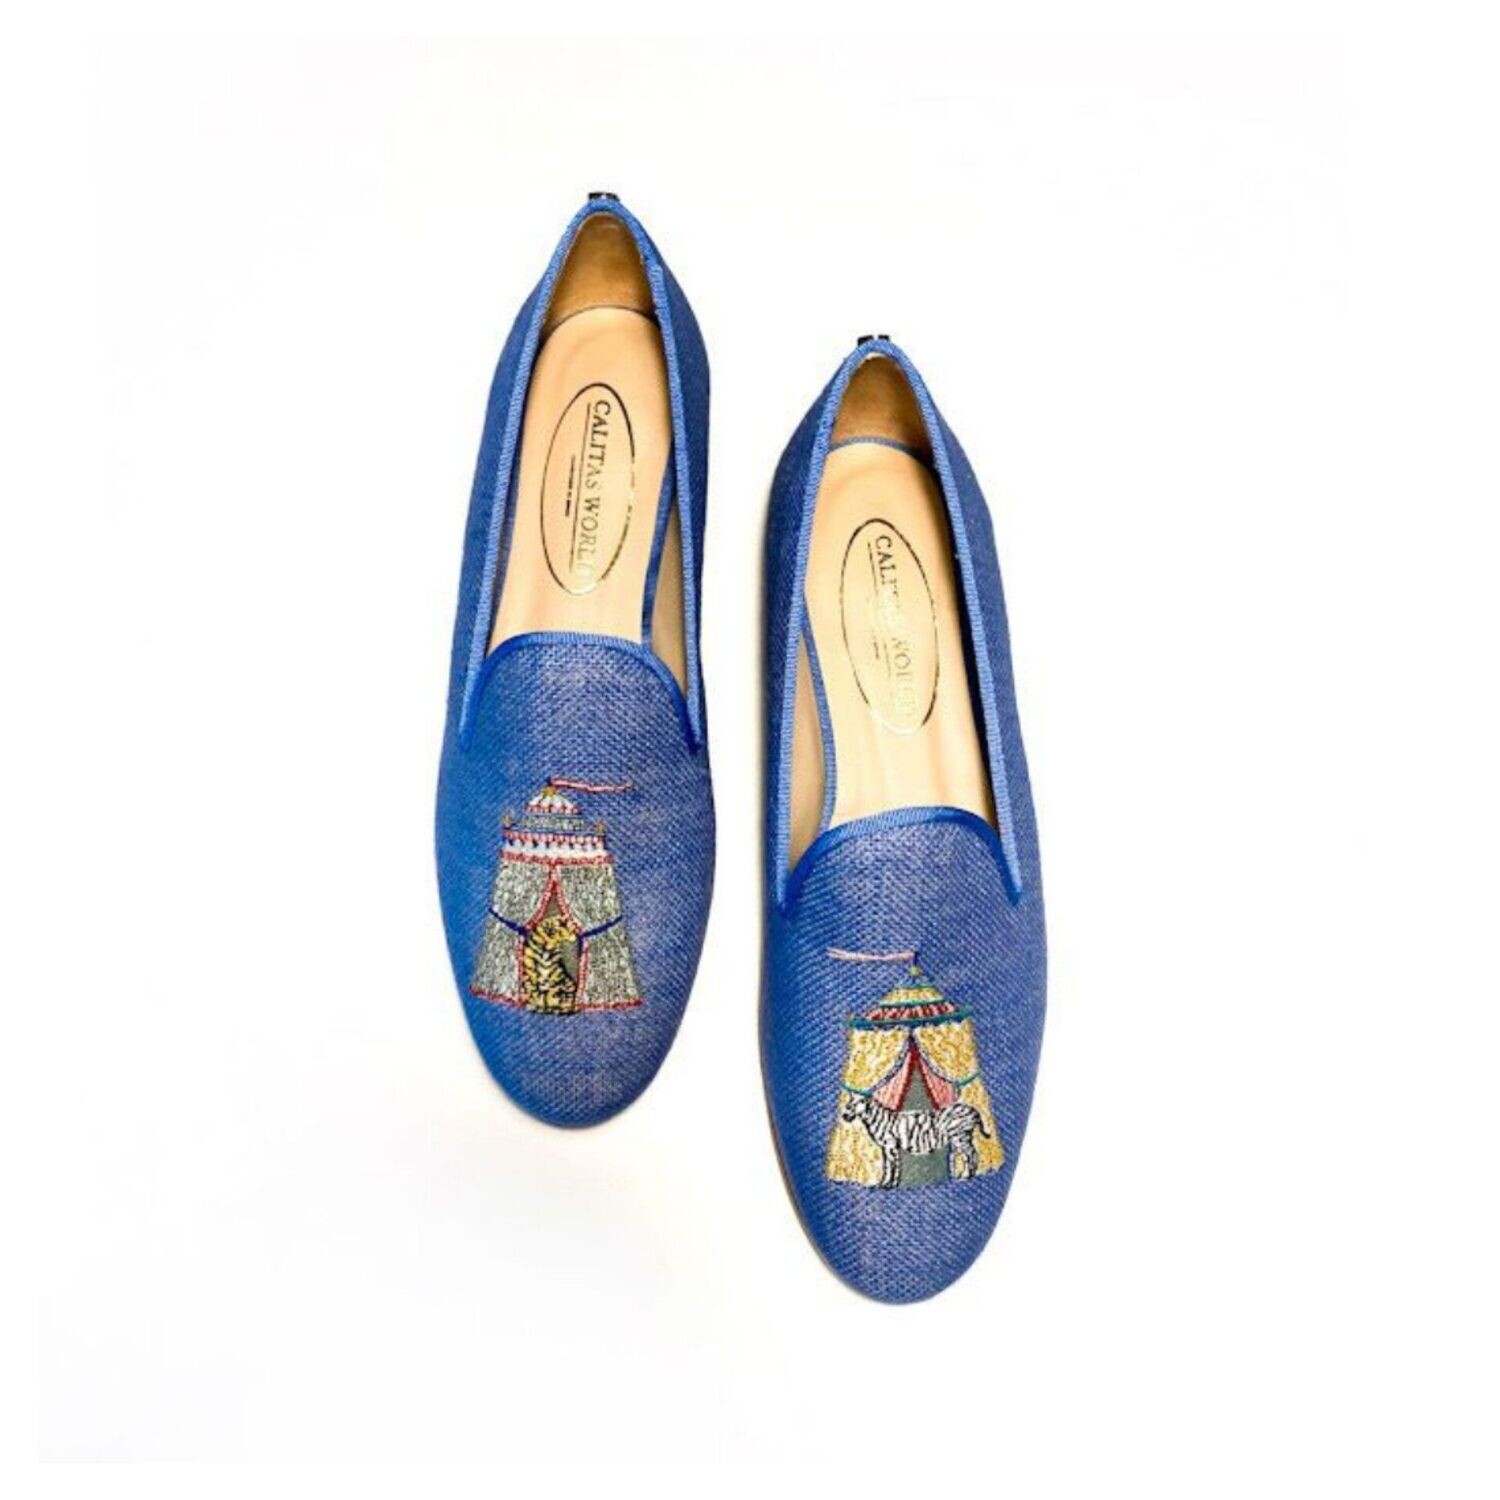 CALITAS WORLD, The Top Of Modern Craftsmanship Shop Luxury loafers.